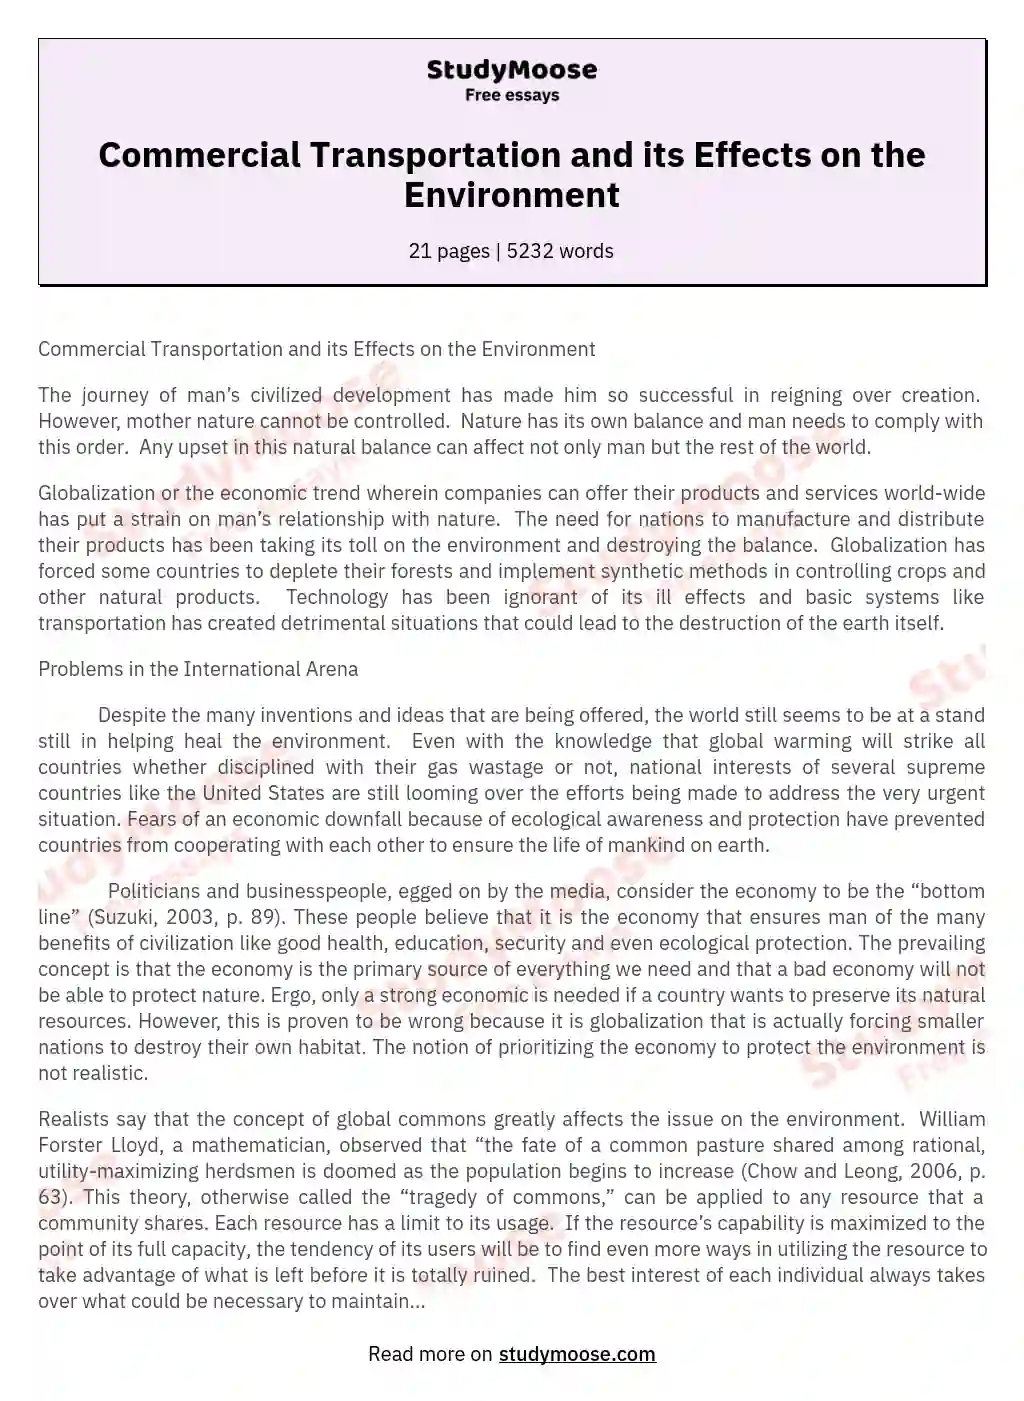 Commercial Transportation and its Effects on the Environment essay